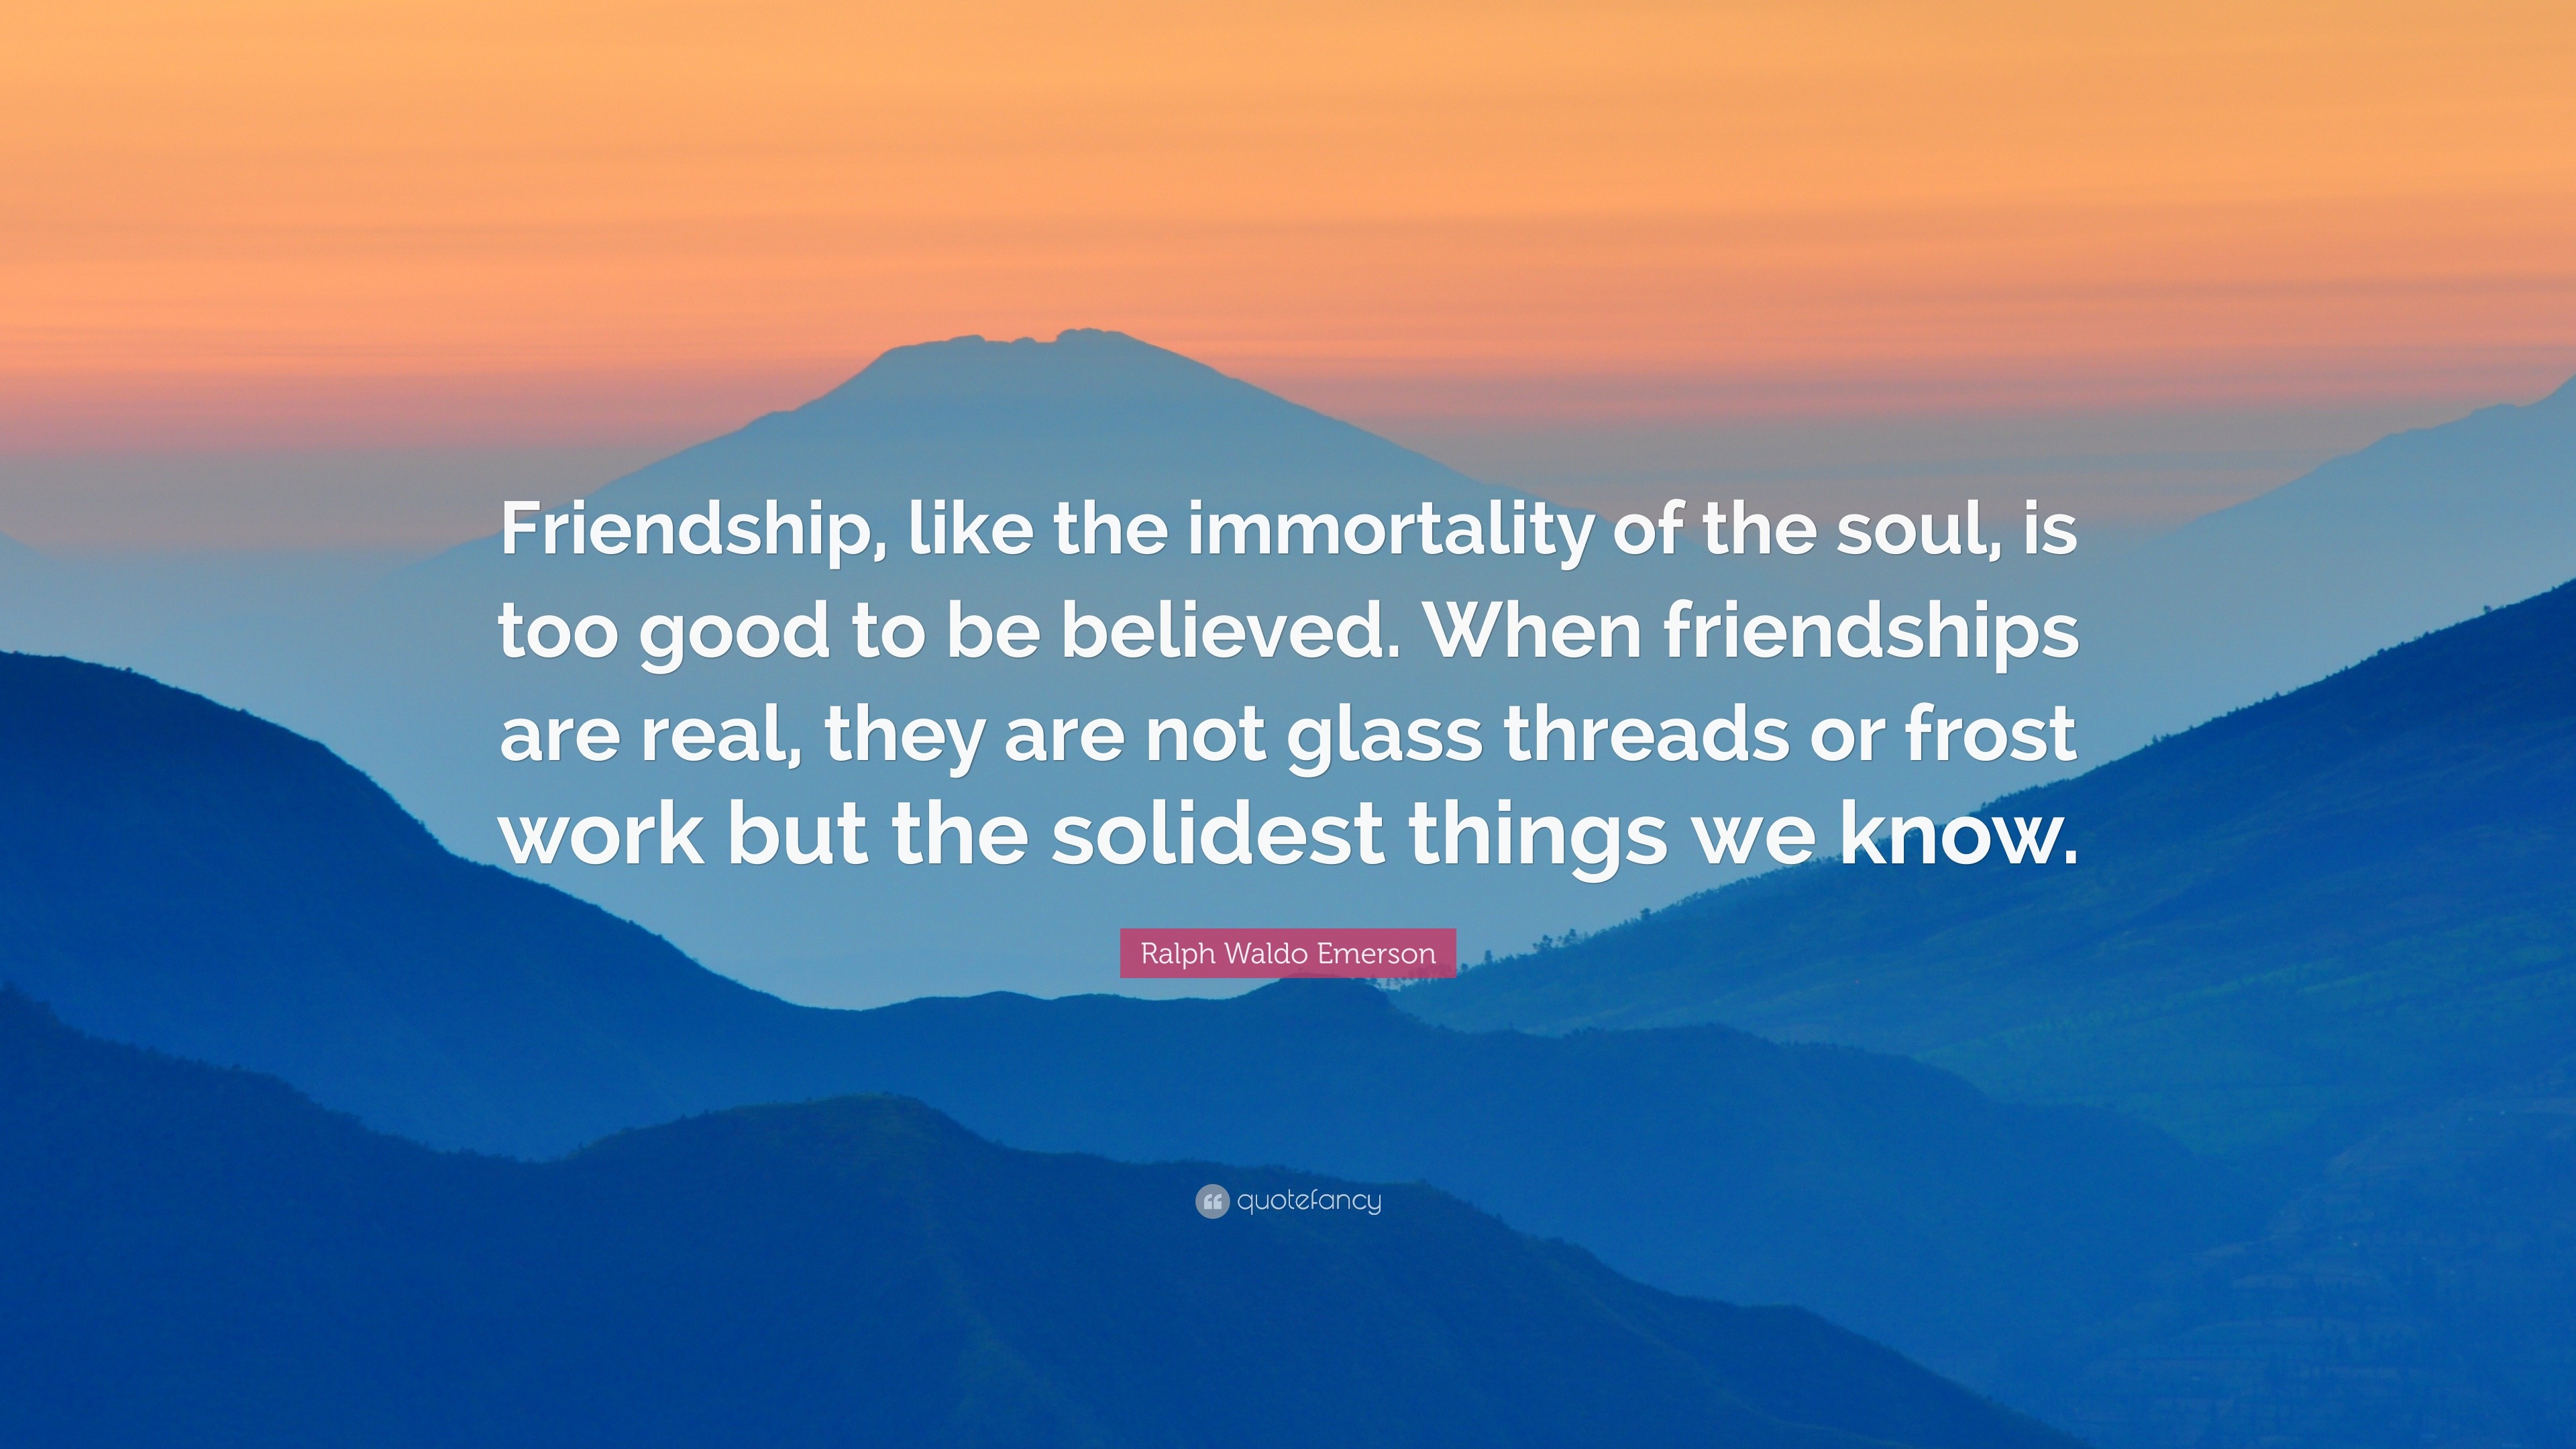 Ralph Waldo Emerson Quote: “Friendship, like the immortality of the